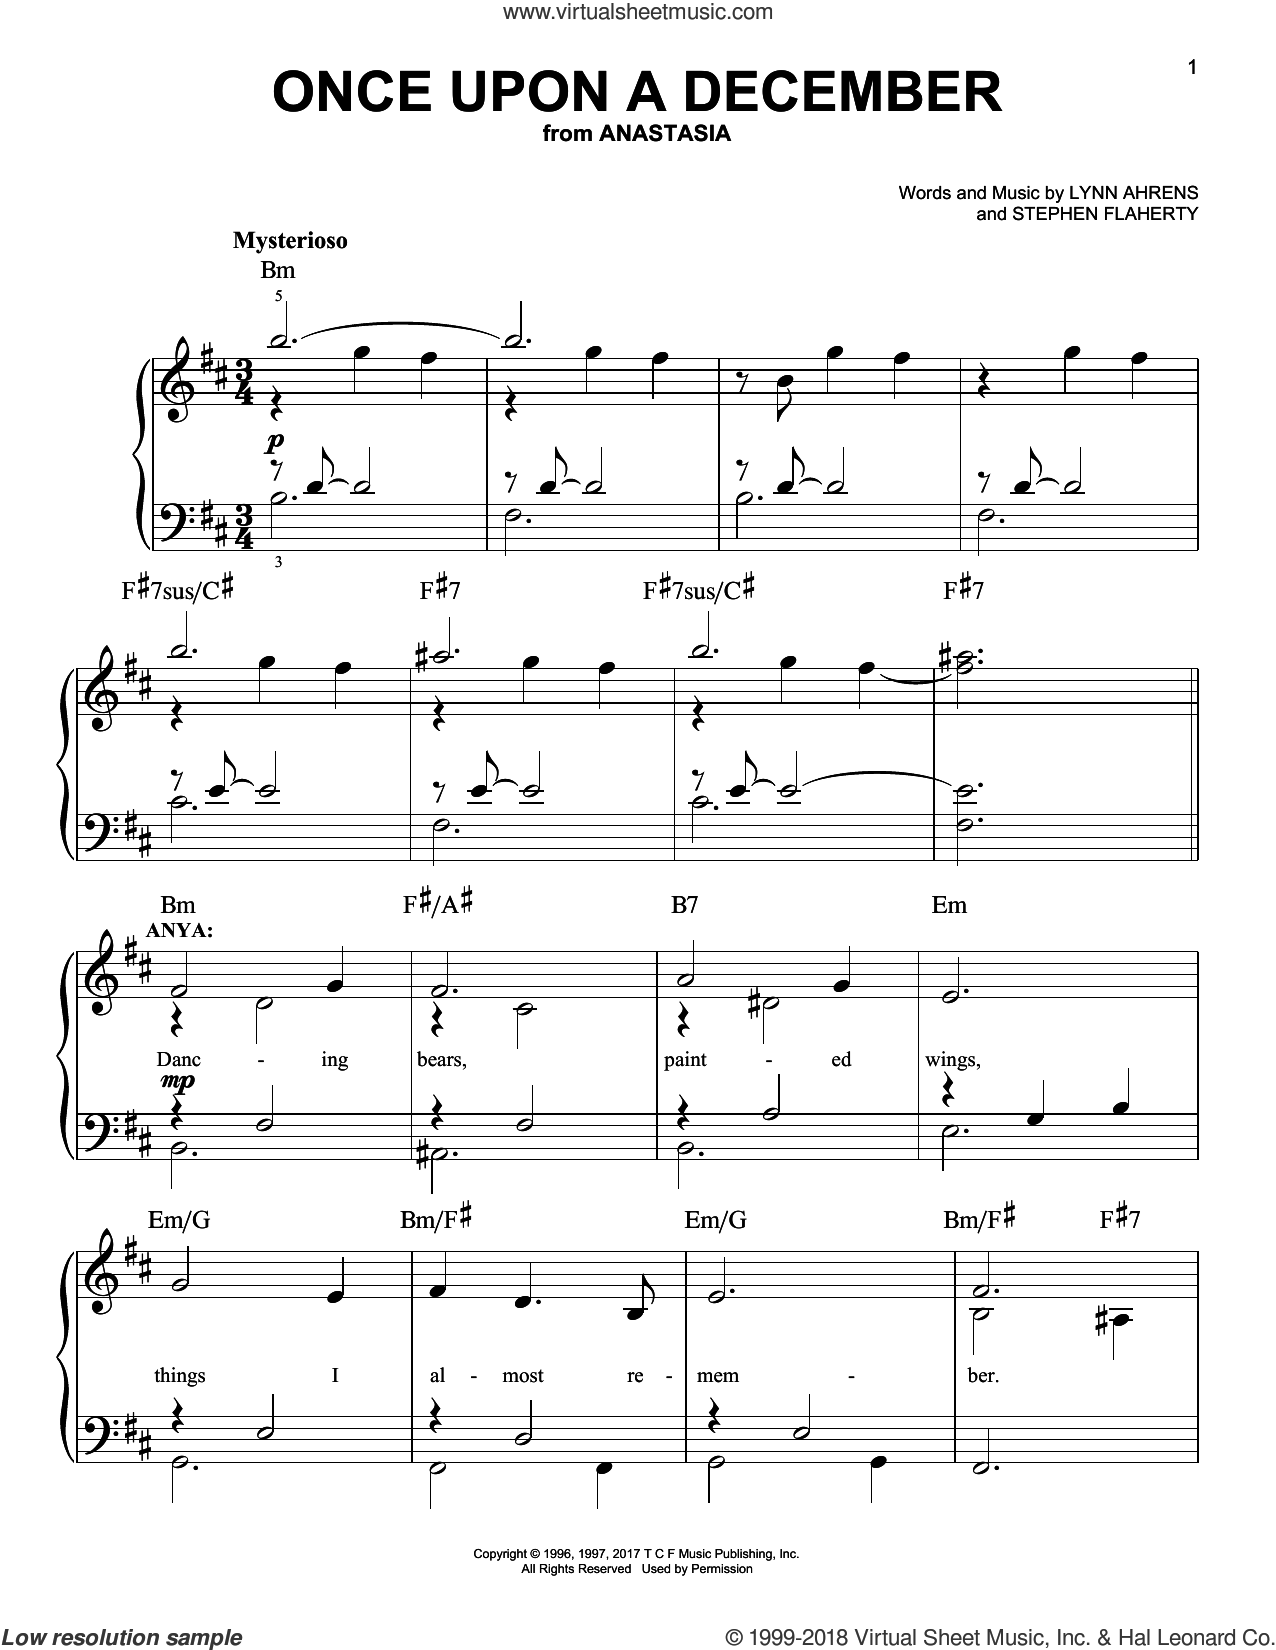 Flaherty - Once Upon A December sheet music (easy) for piano solo